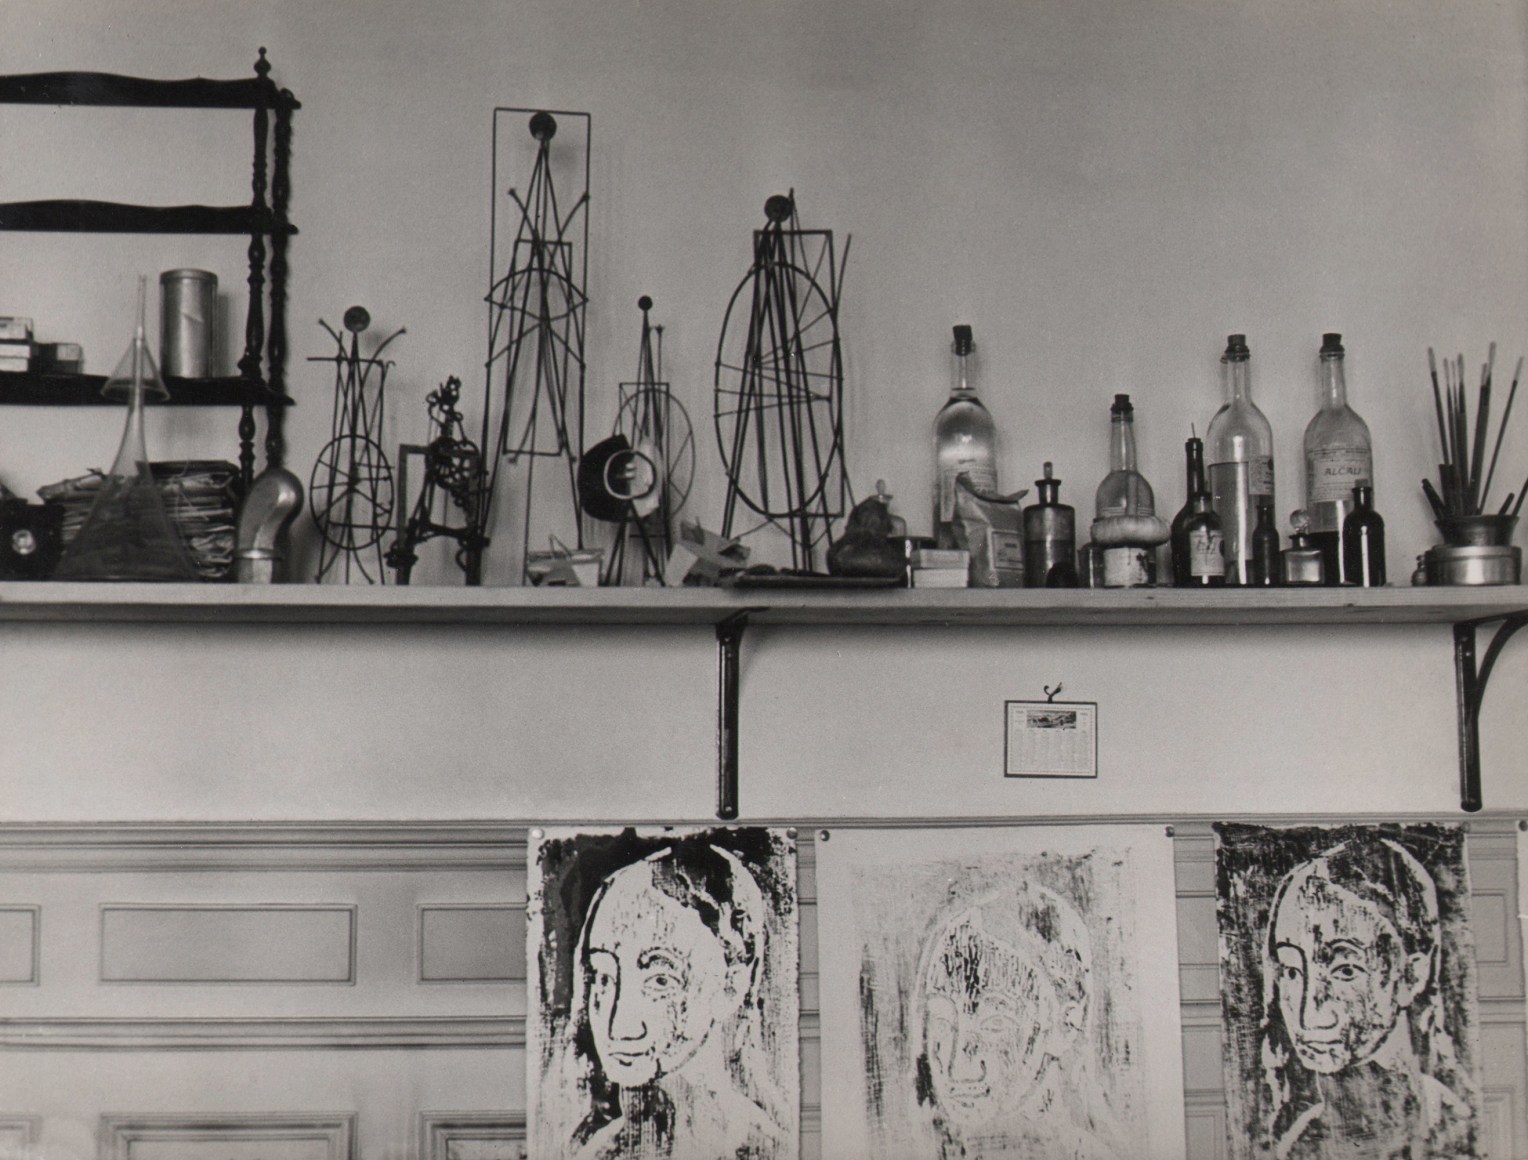 Brassa&iuml;, Atelier de Picasso, ​c. 1933. A shelf on a wall featuring various glass bottles, wire sculptures, and paint brushes. Three prints of the same face hang below it.